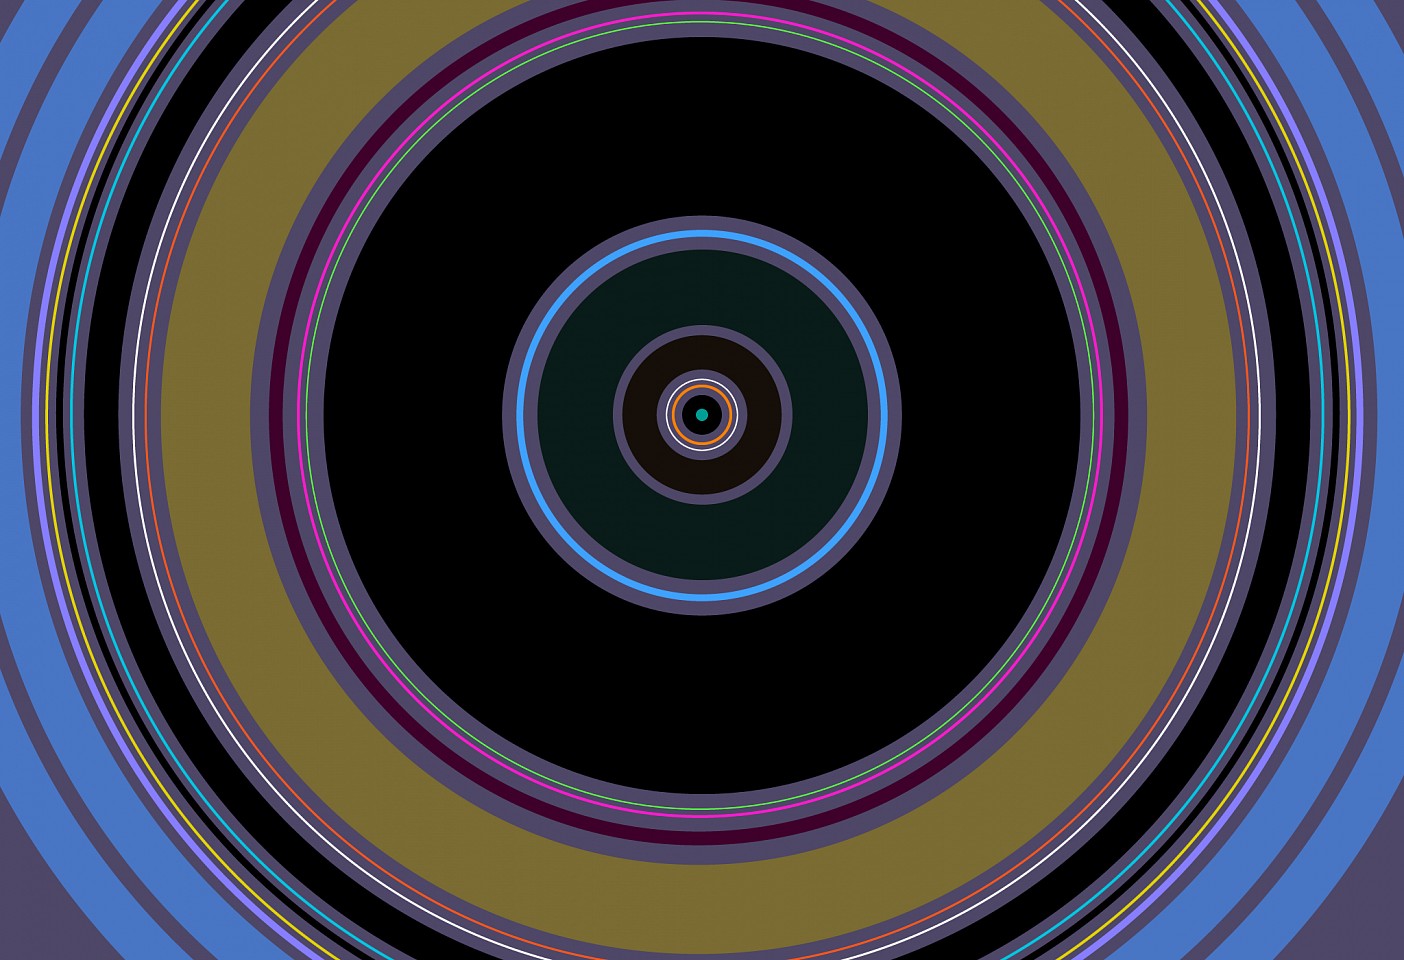 Dane Albert, Circles #46 Night, 2023
Acrylic on canvas (Concept), 48 x 72 in. (121.9 x 182.9 cm)
Series of colored lines and shapes in multiple configurations
DA.2023-046-night